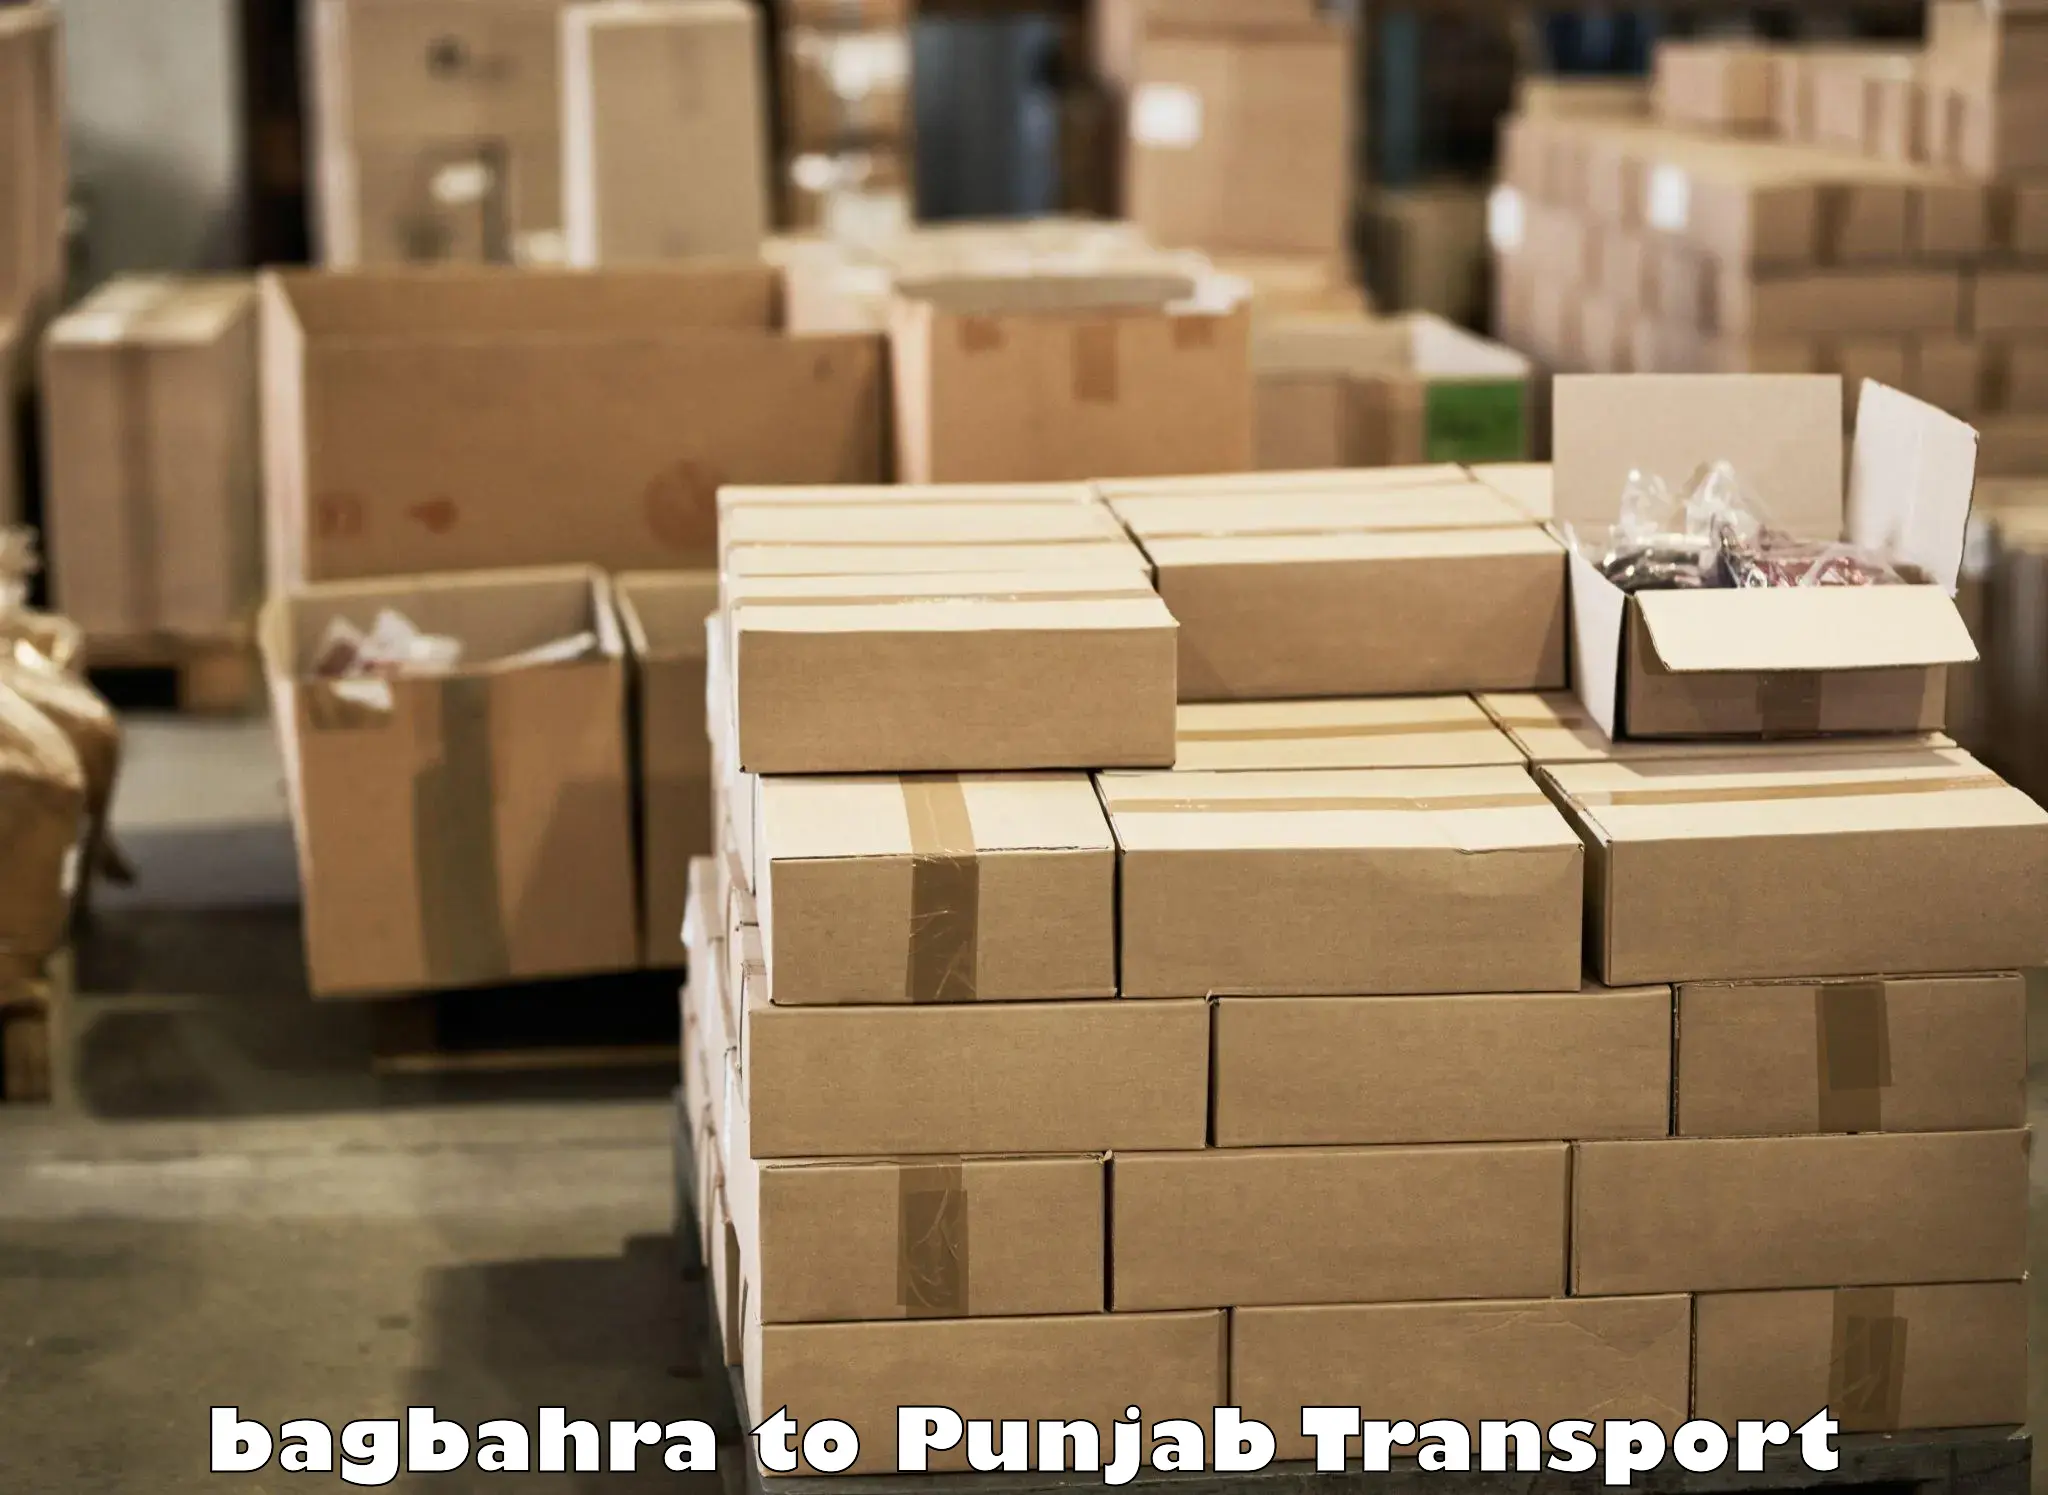 Daily parcel service transport bagbahra to Patiala